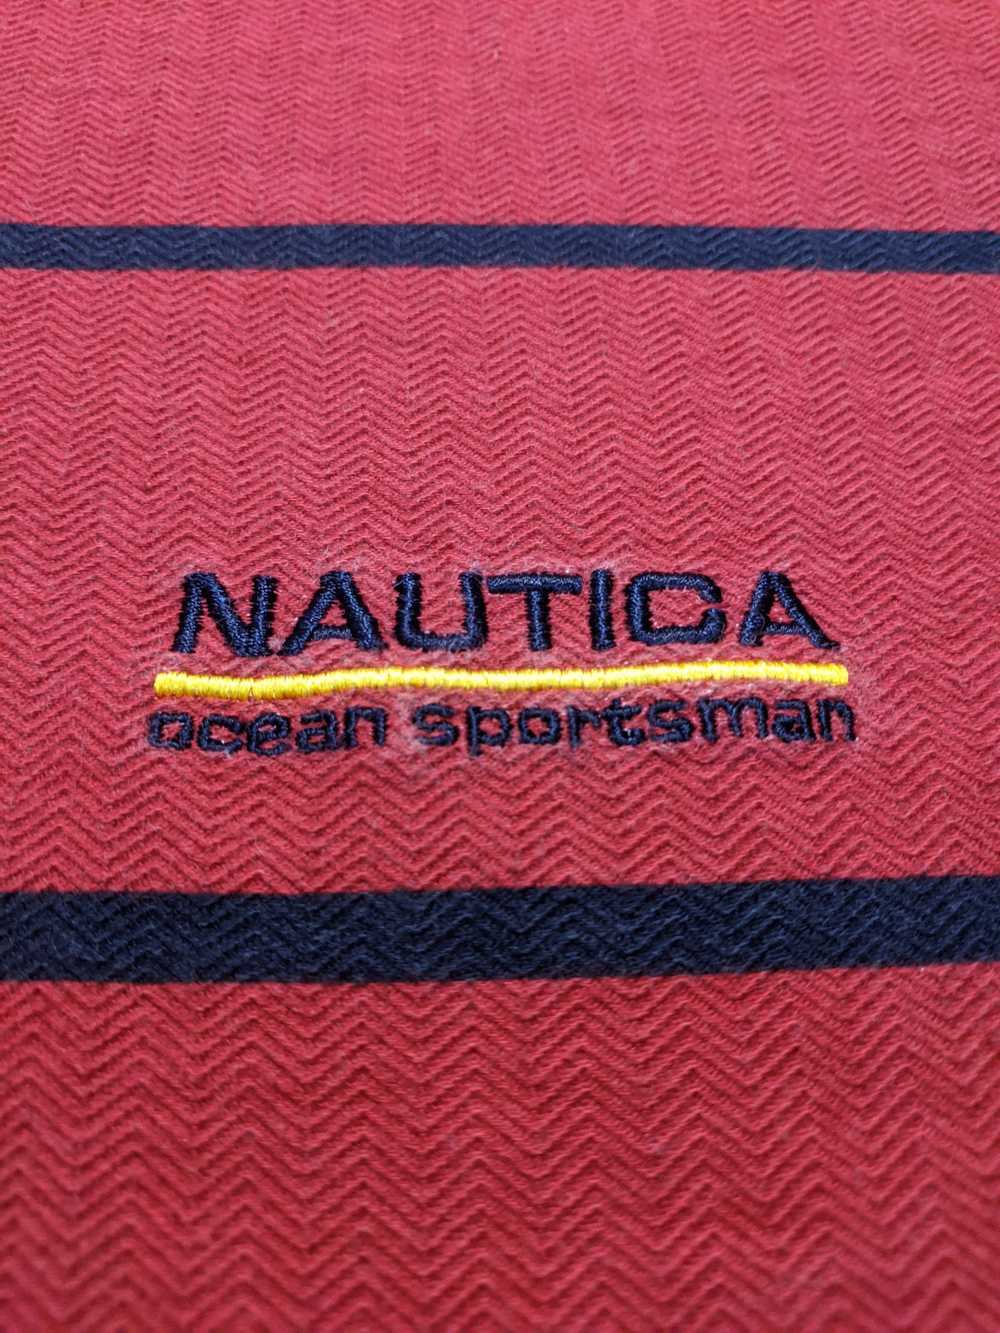 Nautica Large Red Vintage 1990s Striped Embroider… - image 2